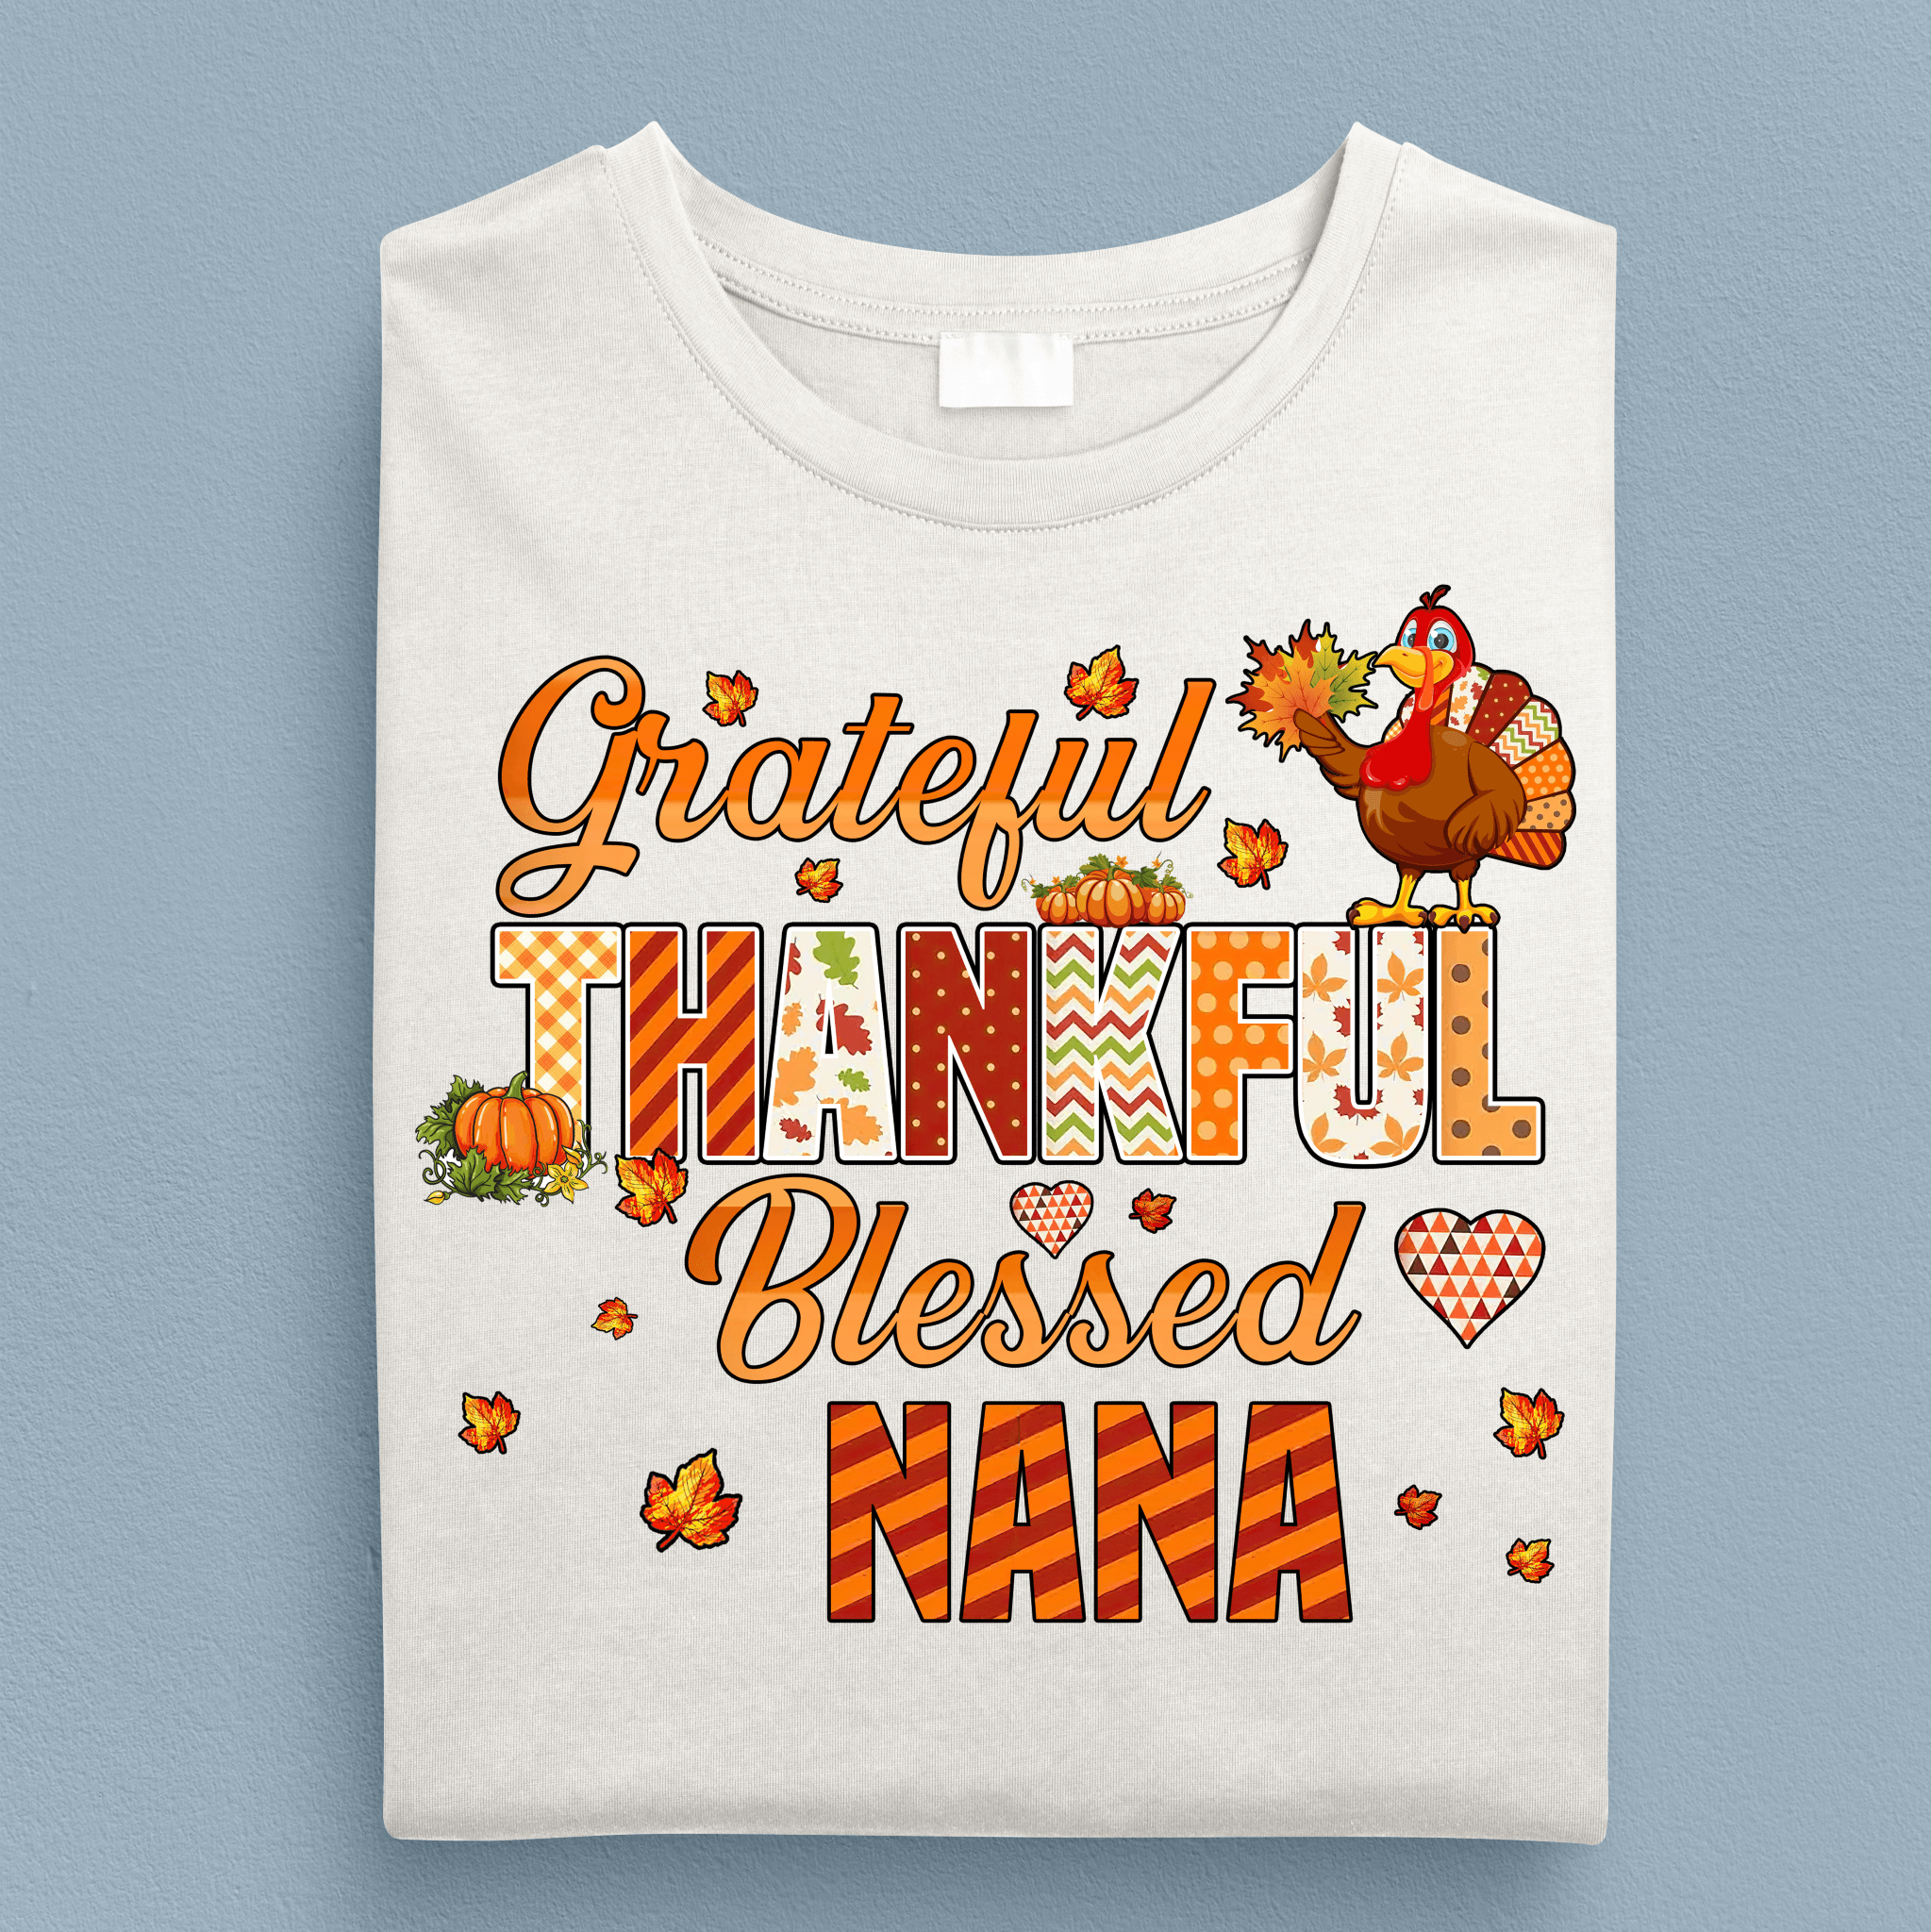 Grateful Thankful Blessed Grandma Personalized T-shirt, Personalized Gift for Nana, Grandma, Grandmother, Grandparents - TS133PS06 - BMGifts